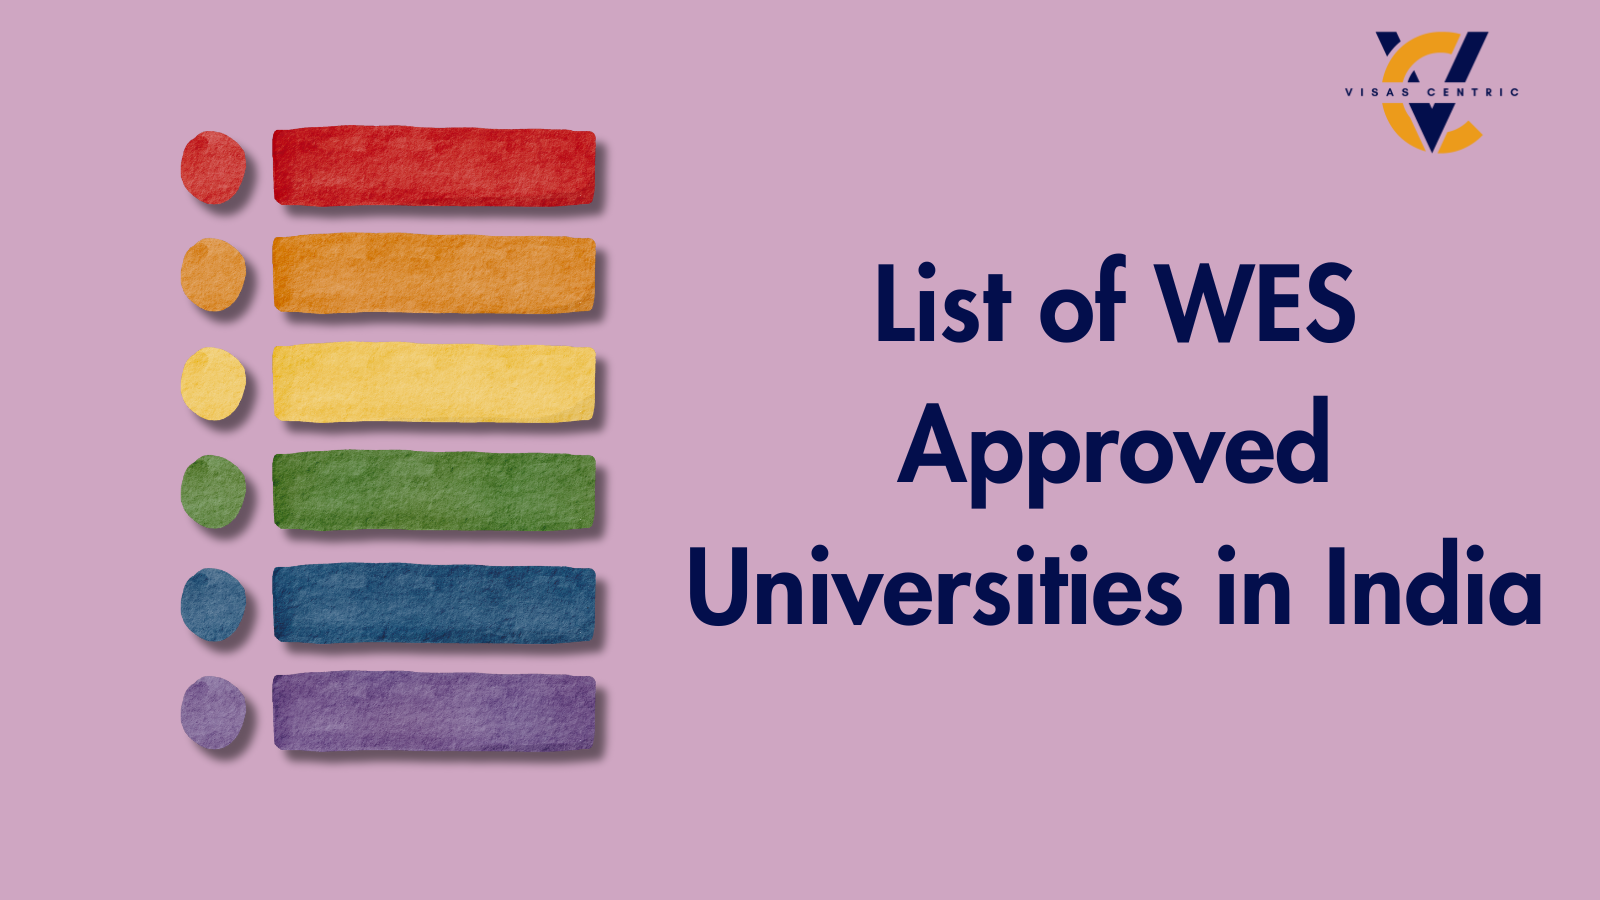 Full List of WES Approved Universities in India